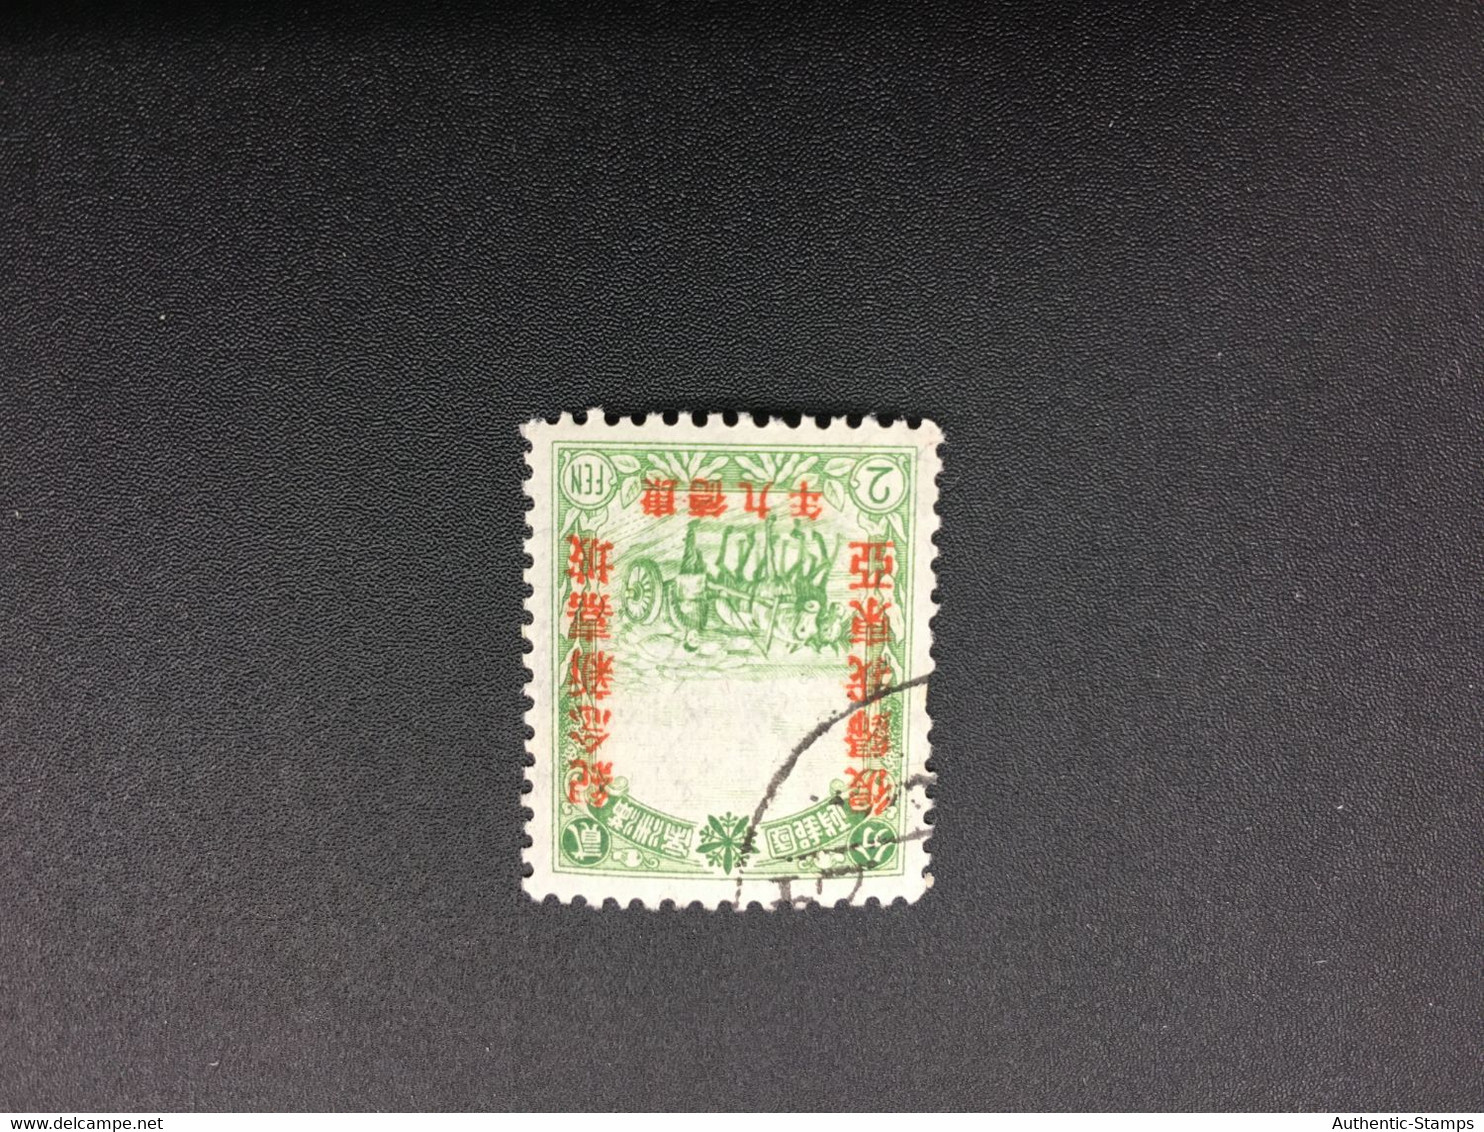 CHINA STAMP, SET, Manchuria, USED, TIMBRO, STEMPEL, CINA, CHINE, LIST 6682 - 1932-45 Mandchourie (Mandchoukouo)